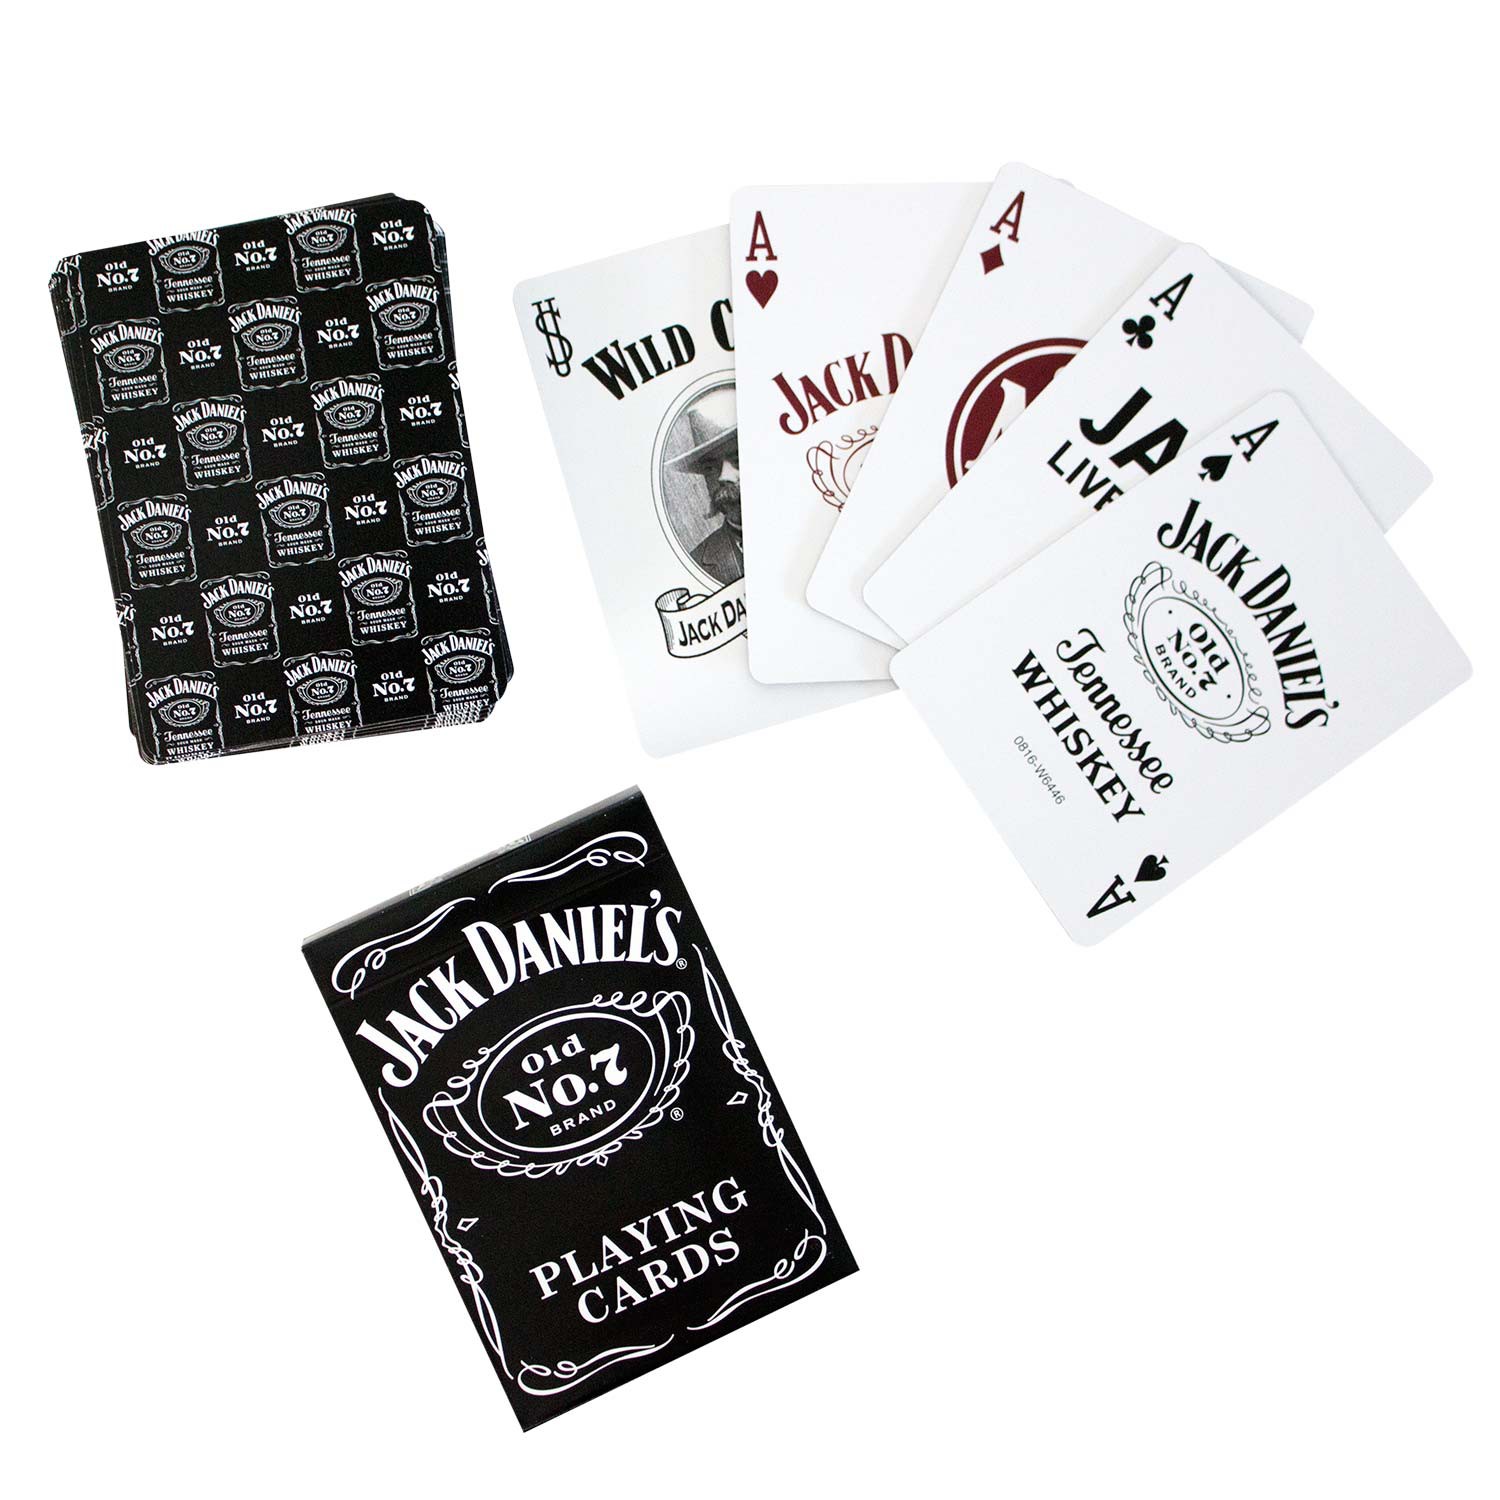 6 Sealed Decks Jack Daniels Tennessee  Old No #7 souvenir playing cards NEW 